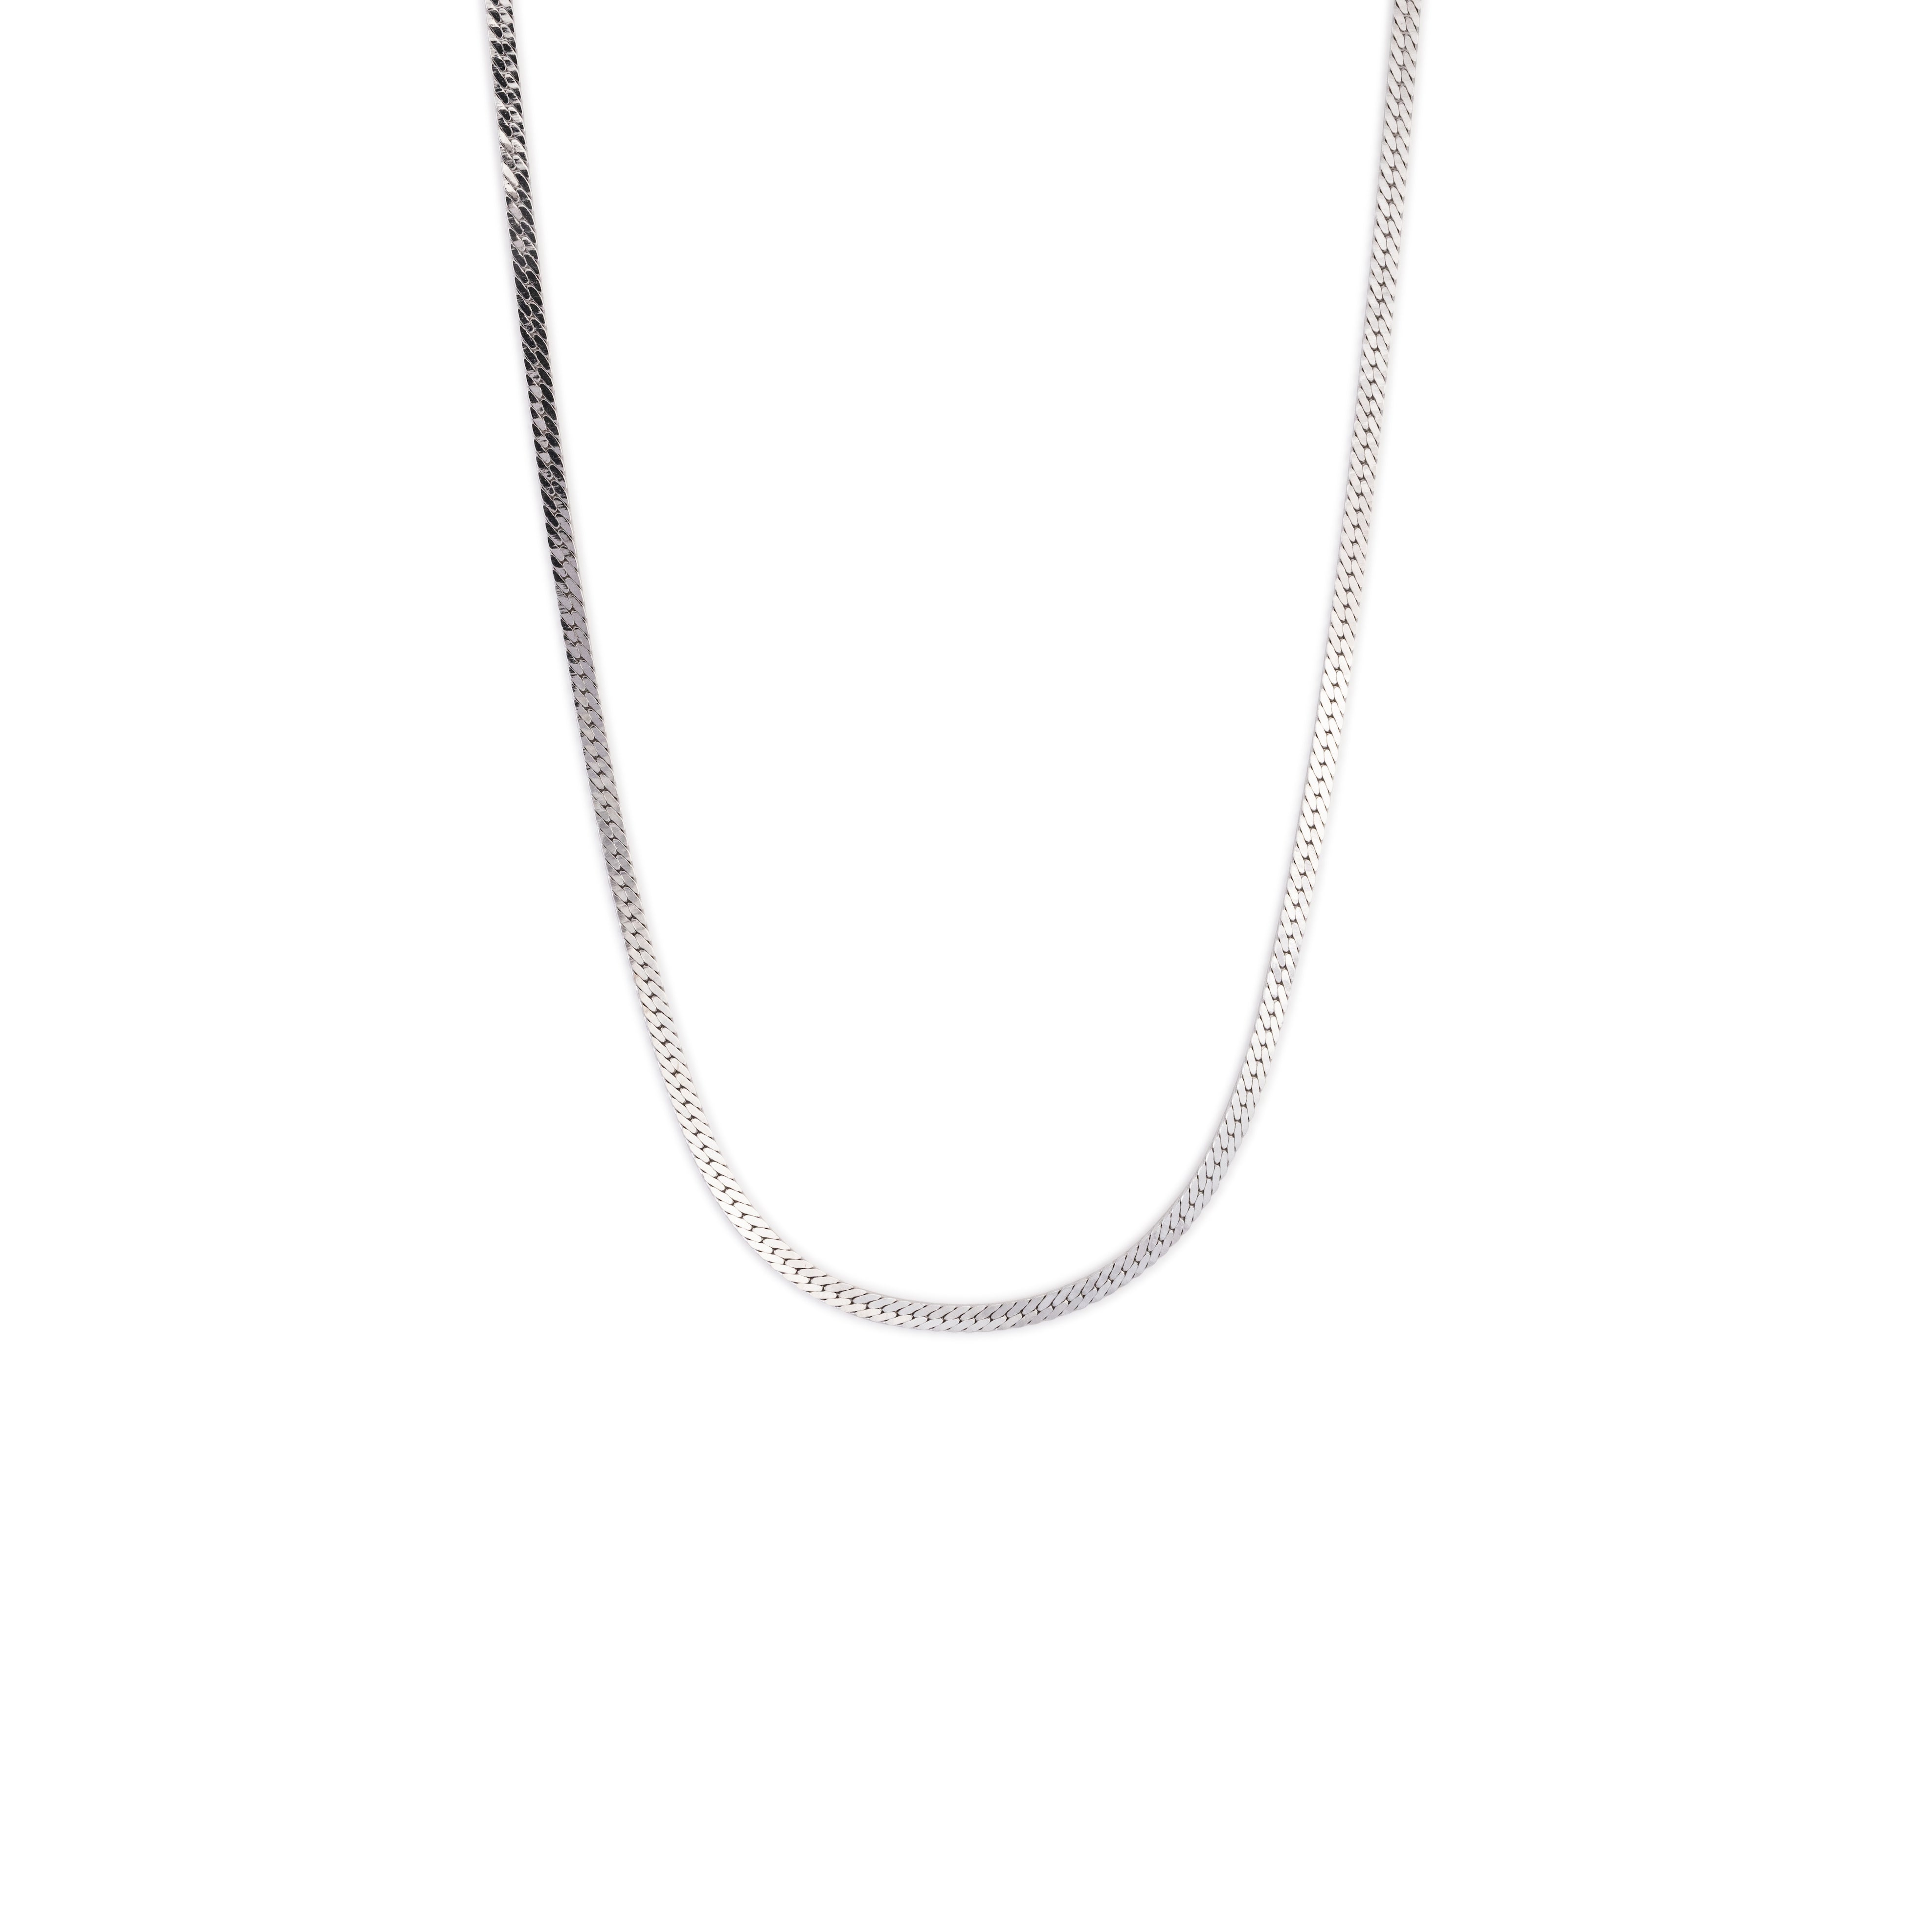 silver rhodium plated flat snake chain